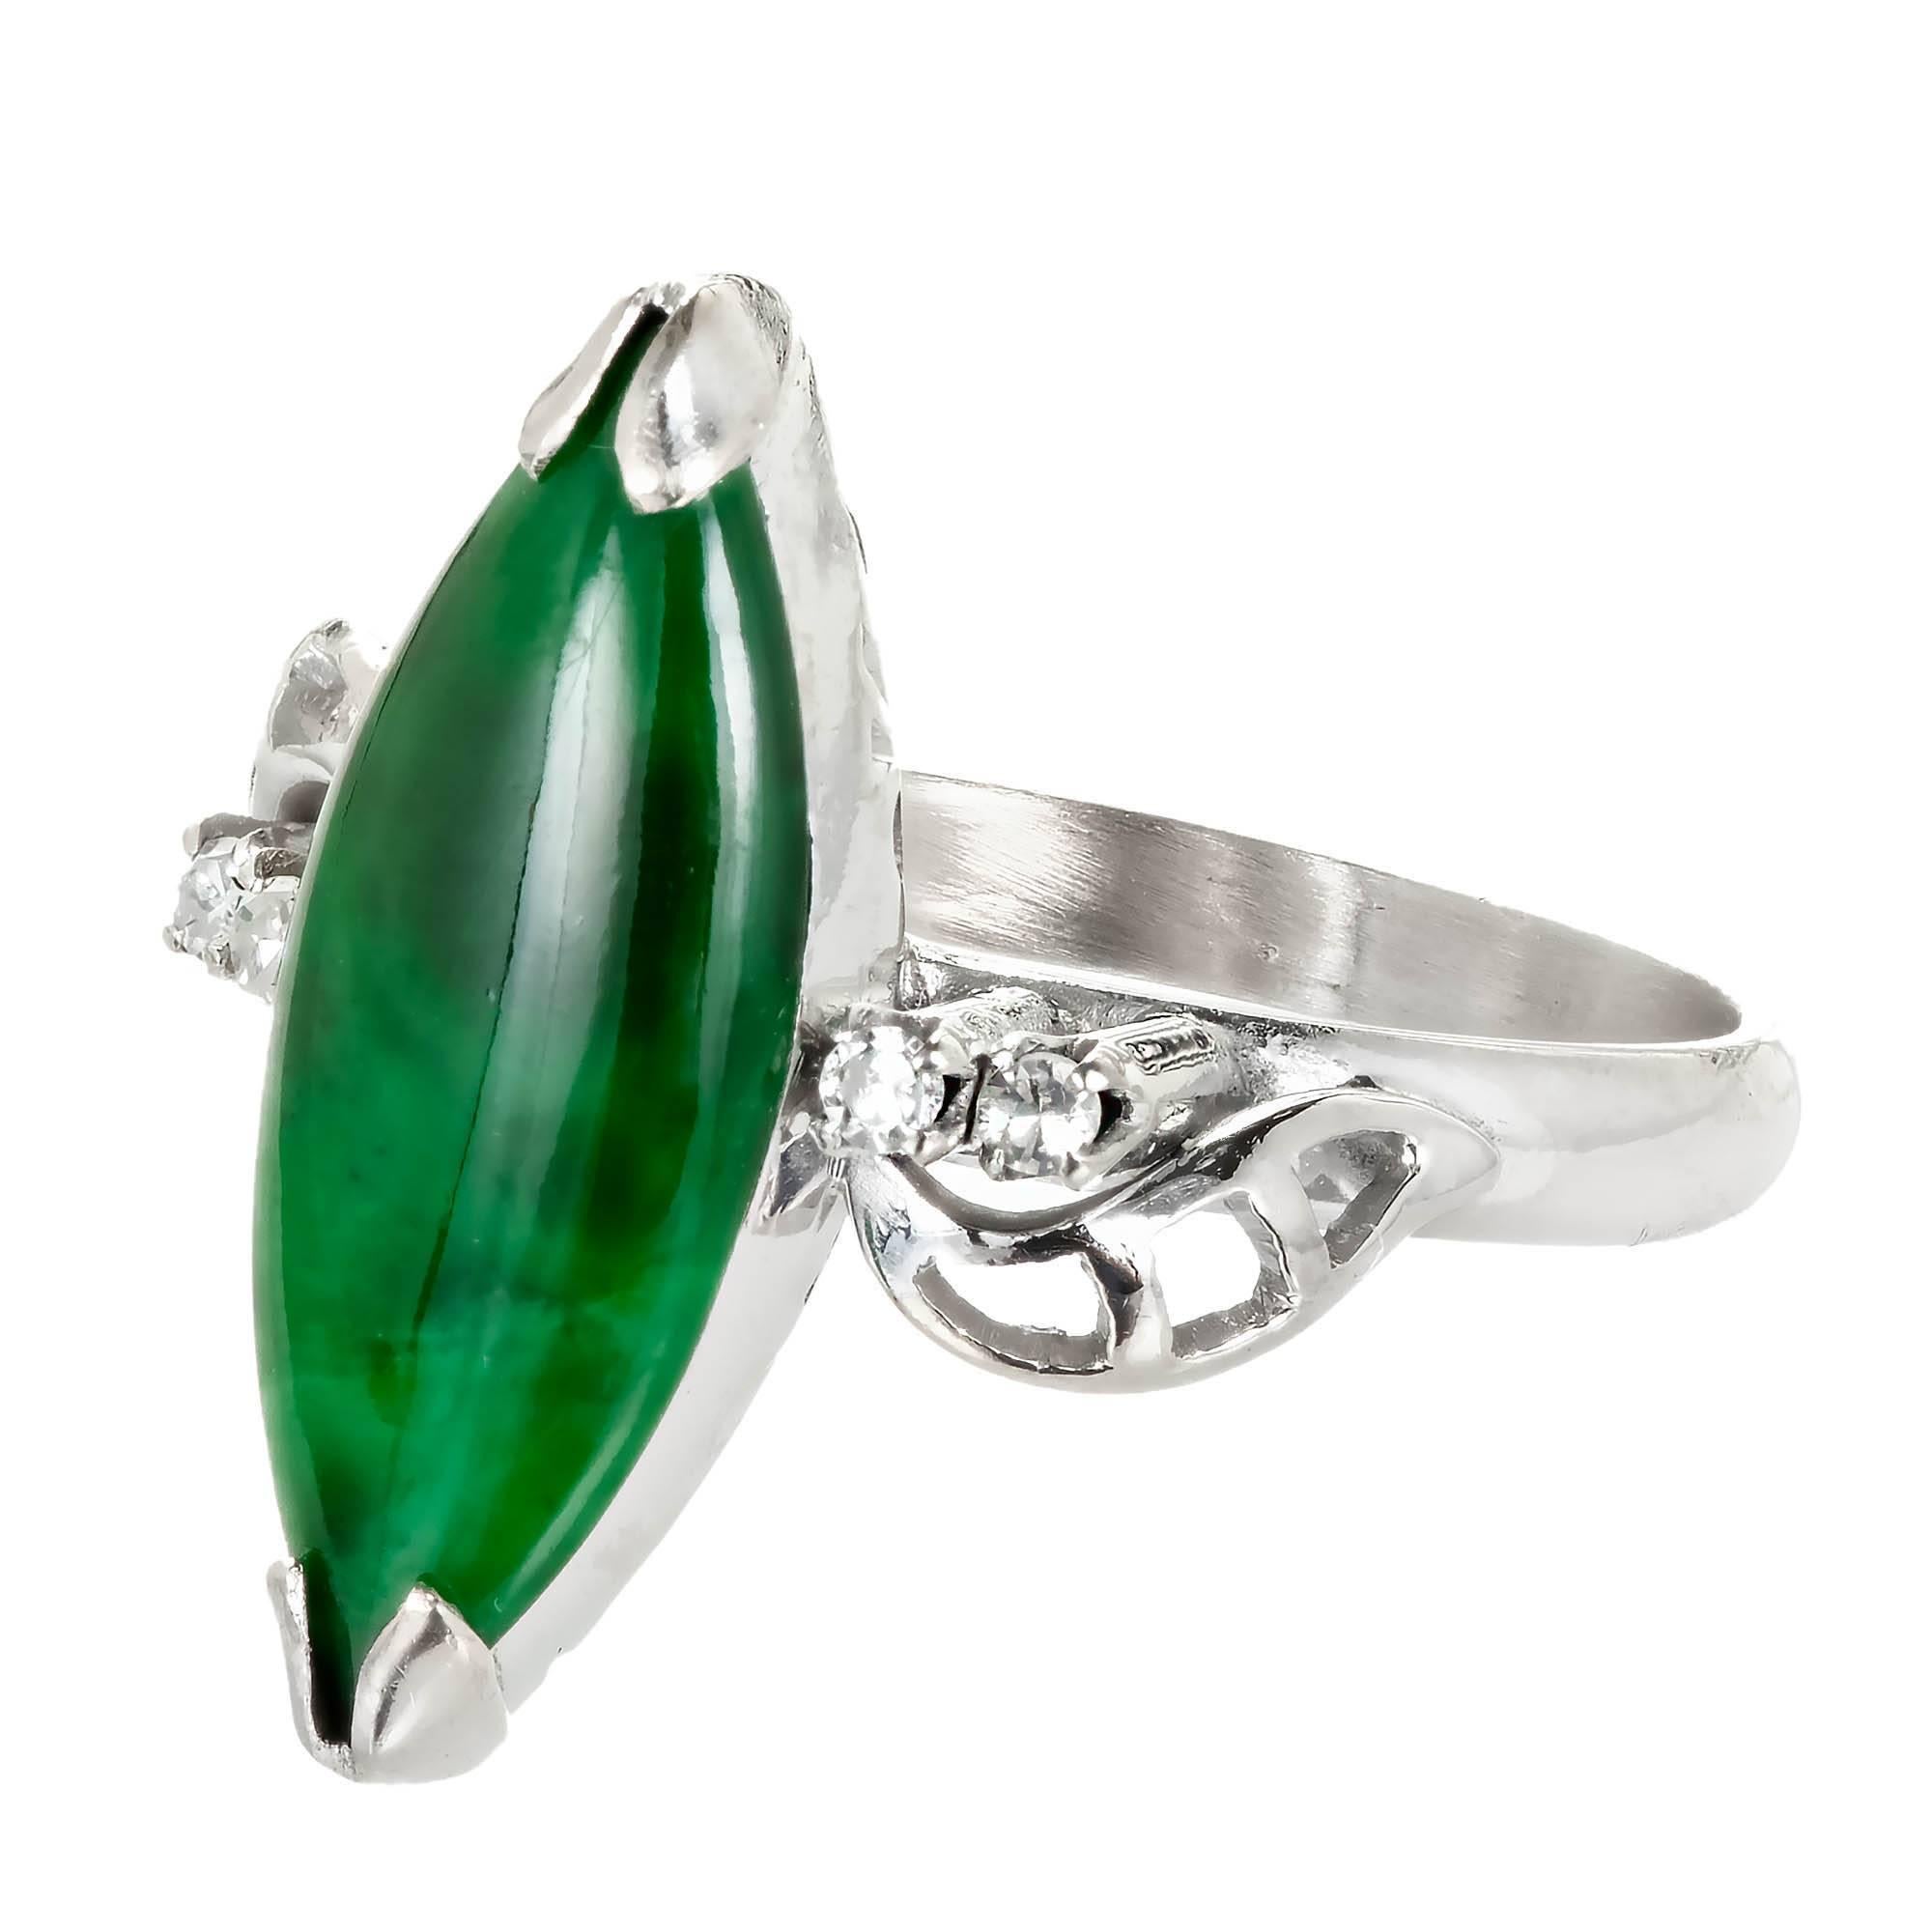 1960’s mid-century Marquise bright green Jadeite Jade ring with Diamond accents in a 14k white gold setting. Certified natural no enhancements. 
	
1 natural Marquise fine green Jadeite Jade, 17.85 x 7.26 x 2.83mm GIA certificate # 6183462463
4